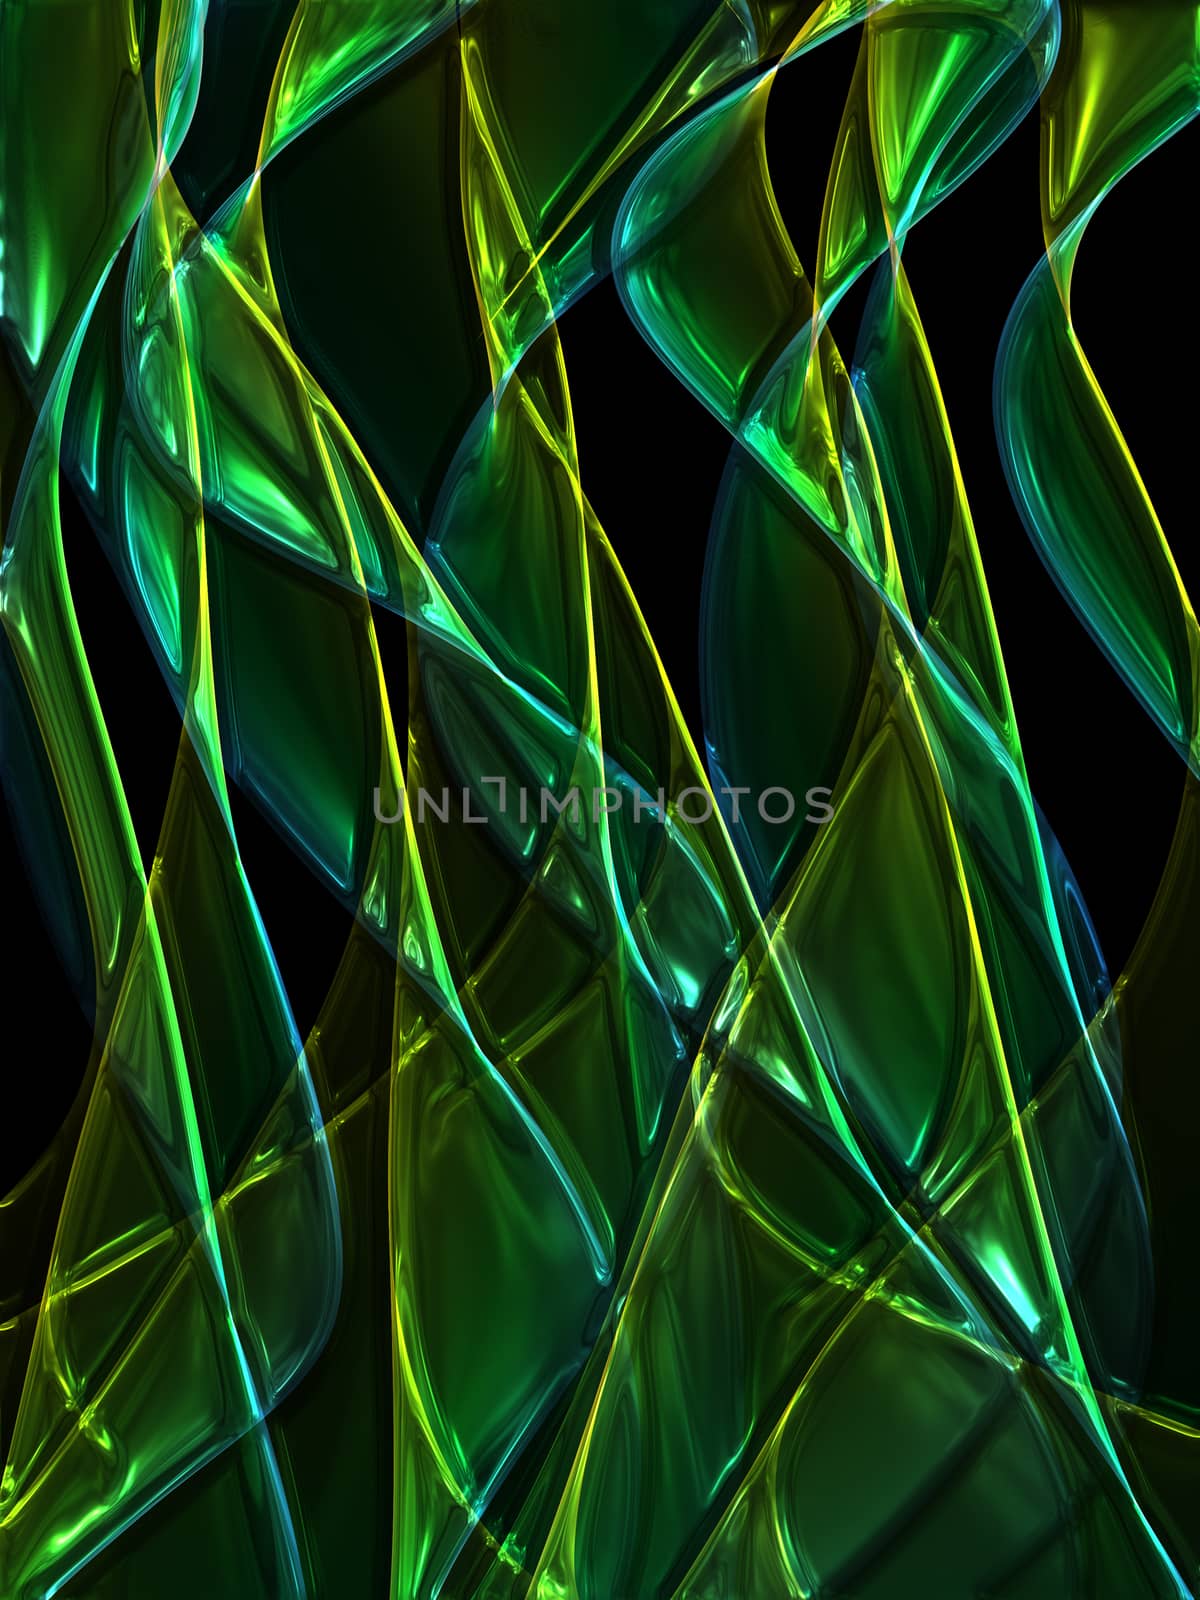 Intertwined wavy green glass design background.